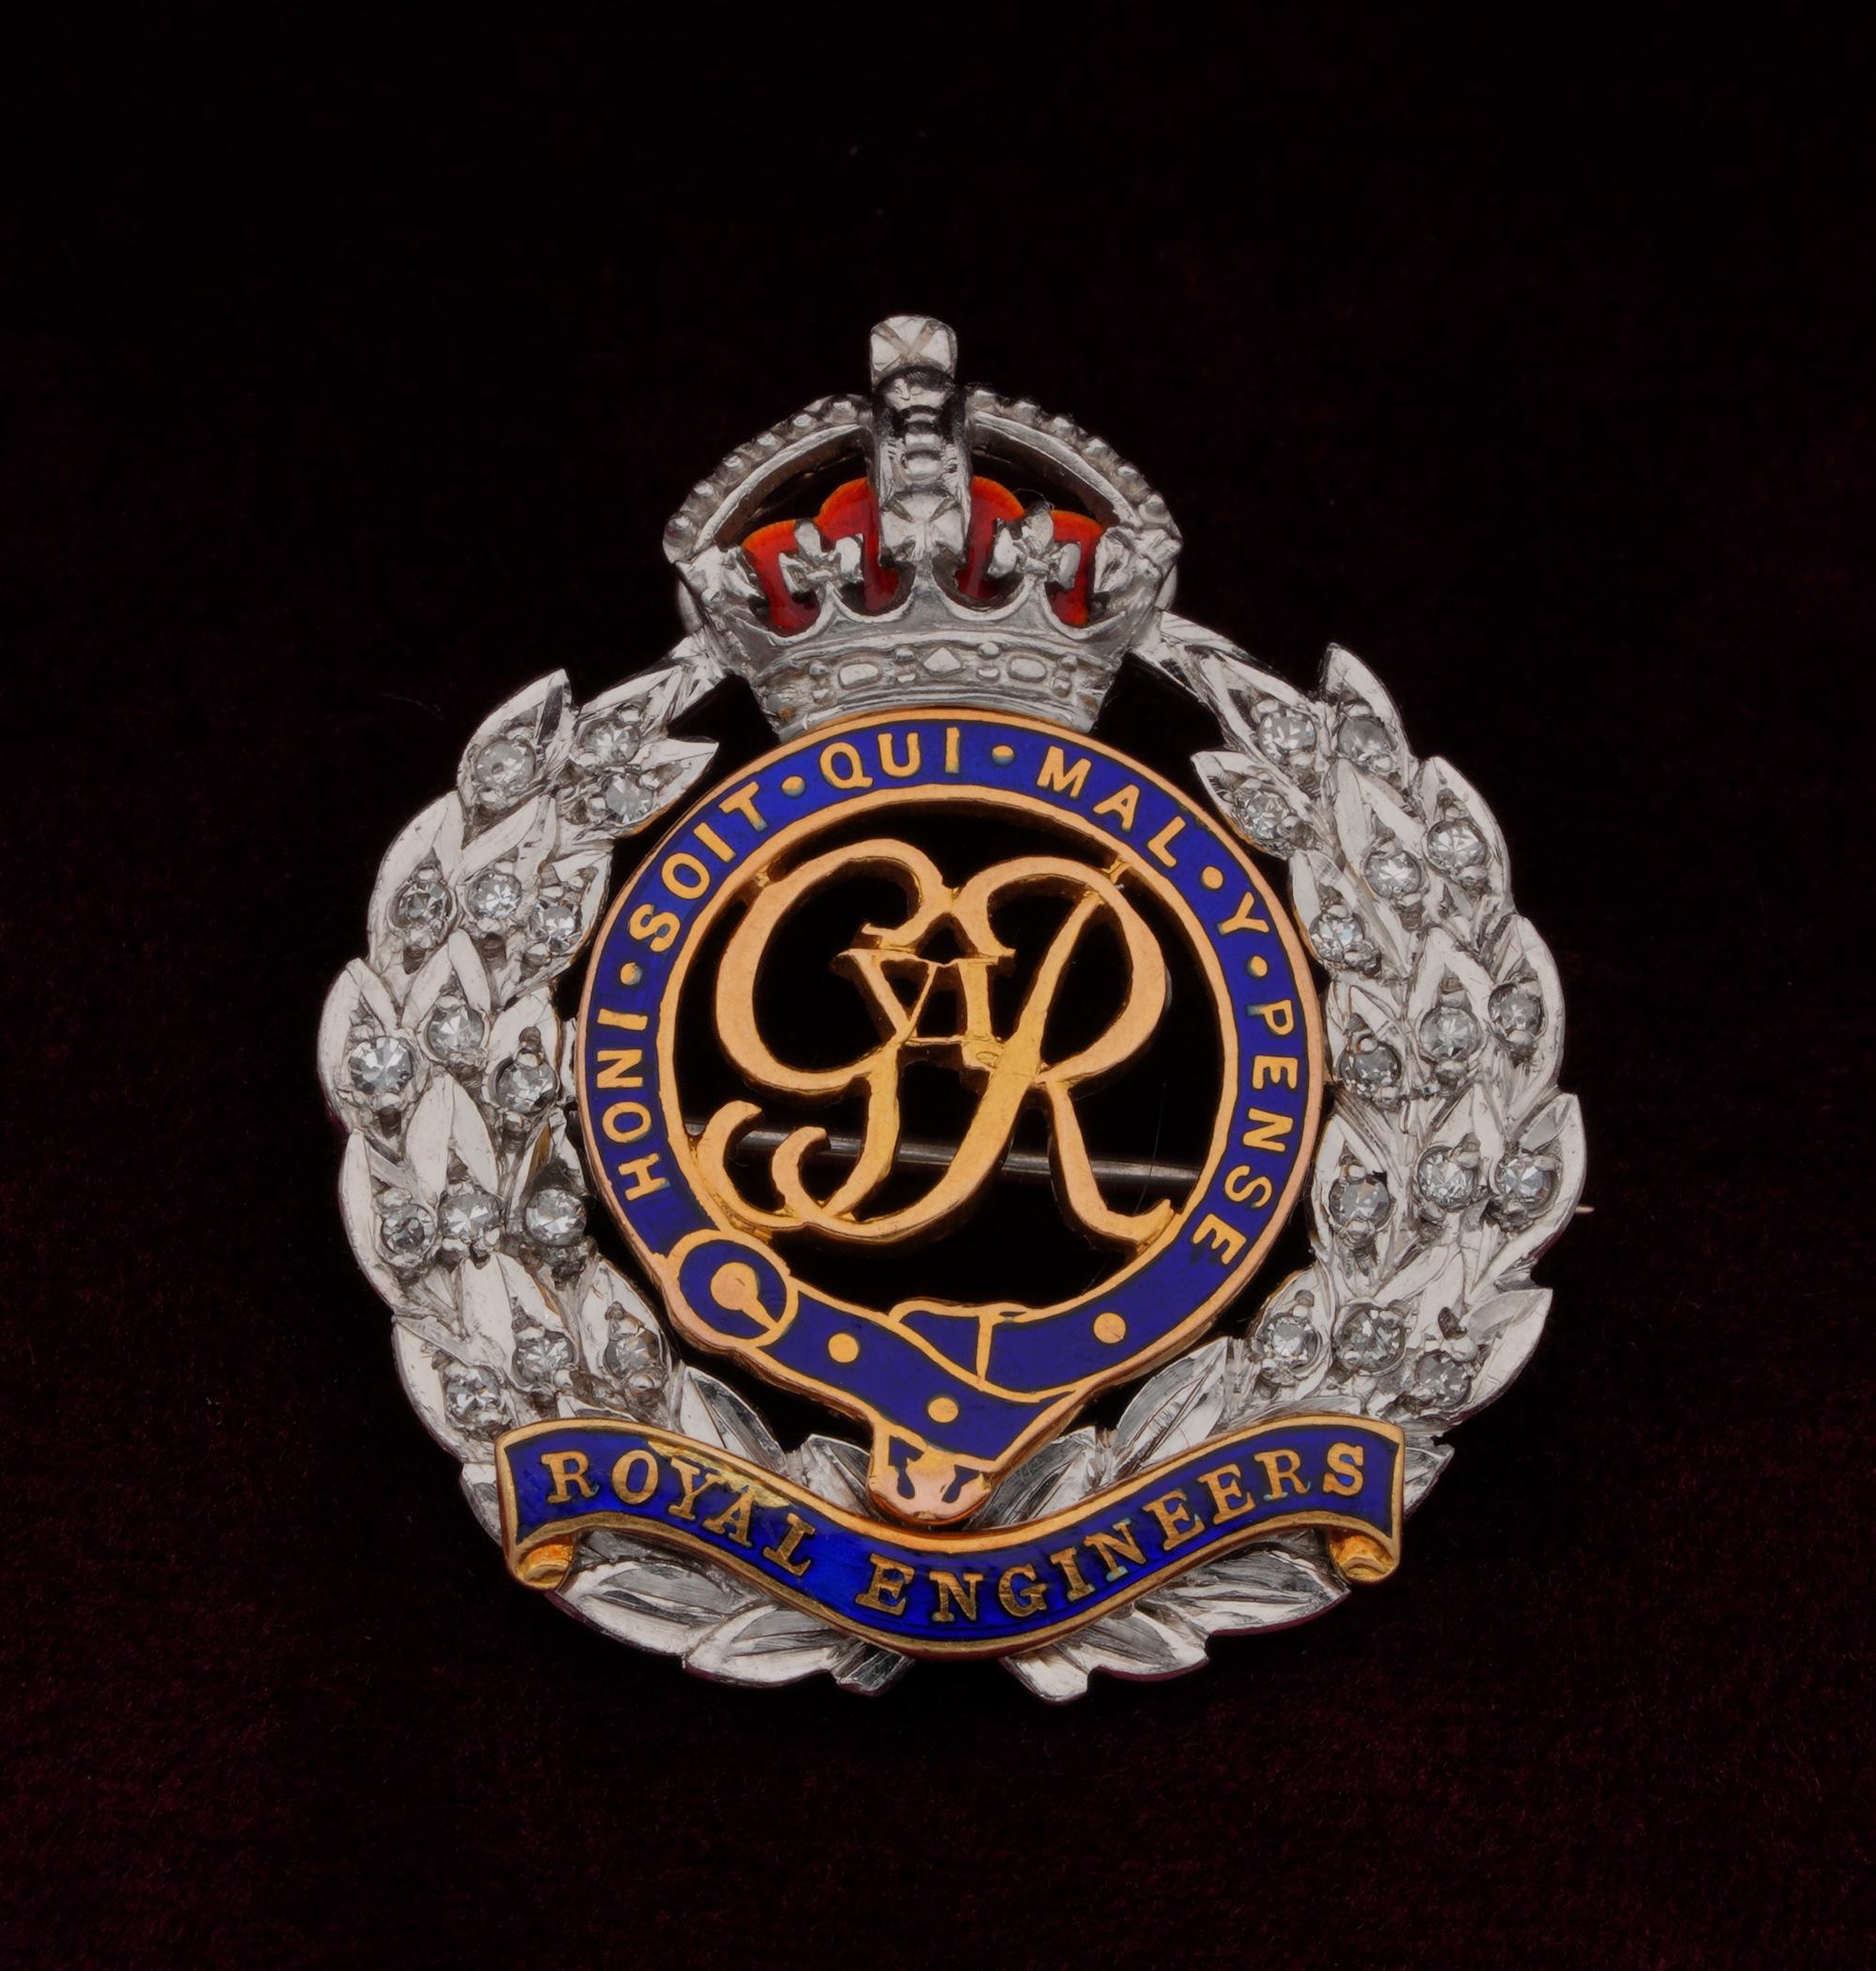 Royal Engineers

Collectable, antique 1930s ca - English 
Finely made of Platinum 18 KT gold detailed with Red and Blue enamelling
Embellished with Diamonds approx .30 Ct
Bearing “Honi -Soit -Qui -Mal – Y – Pense – Royal Engineers” motto
Measures :